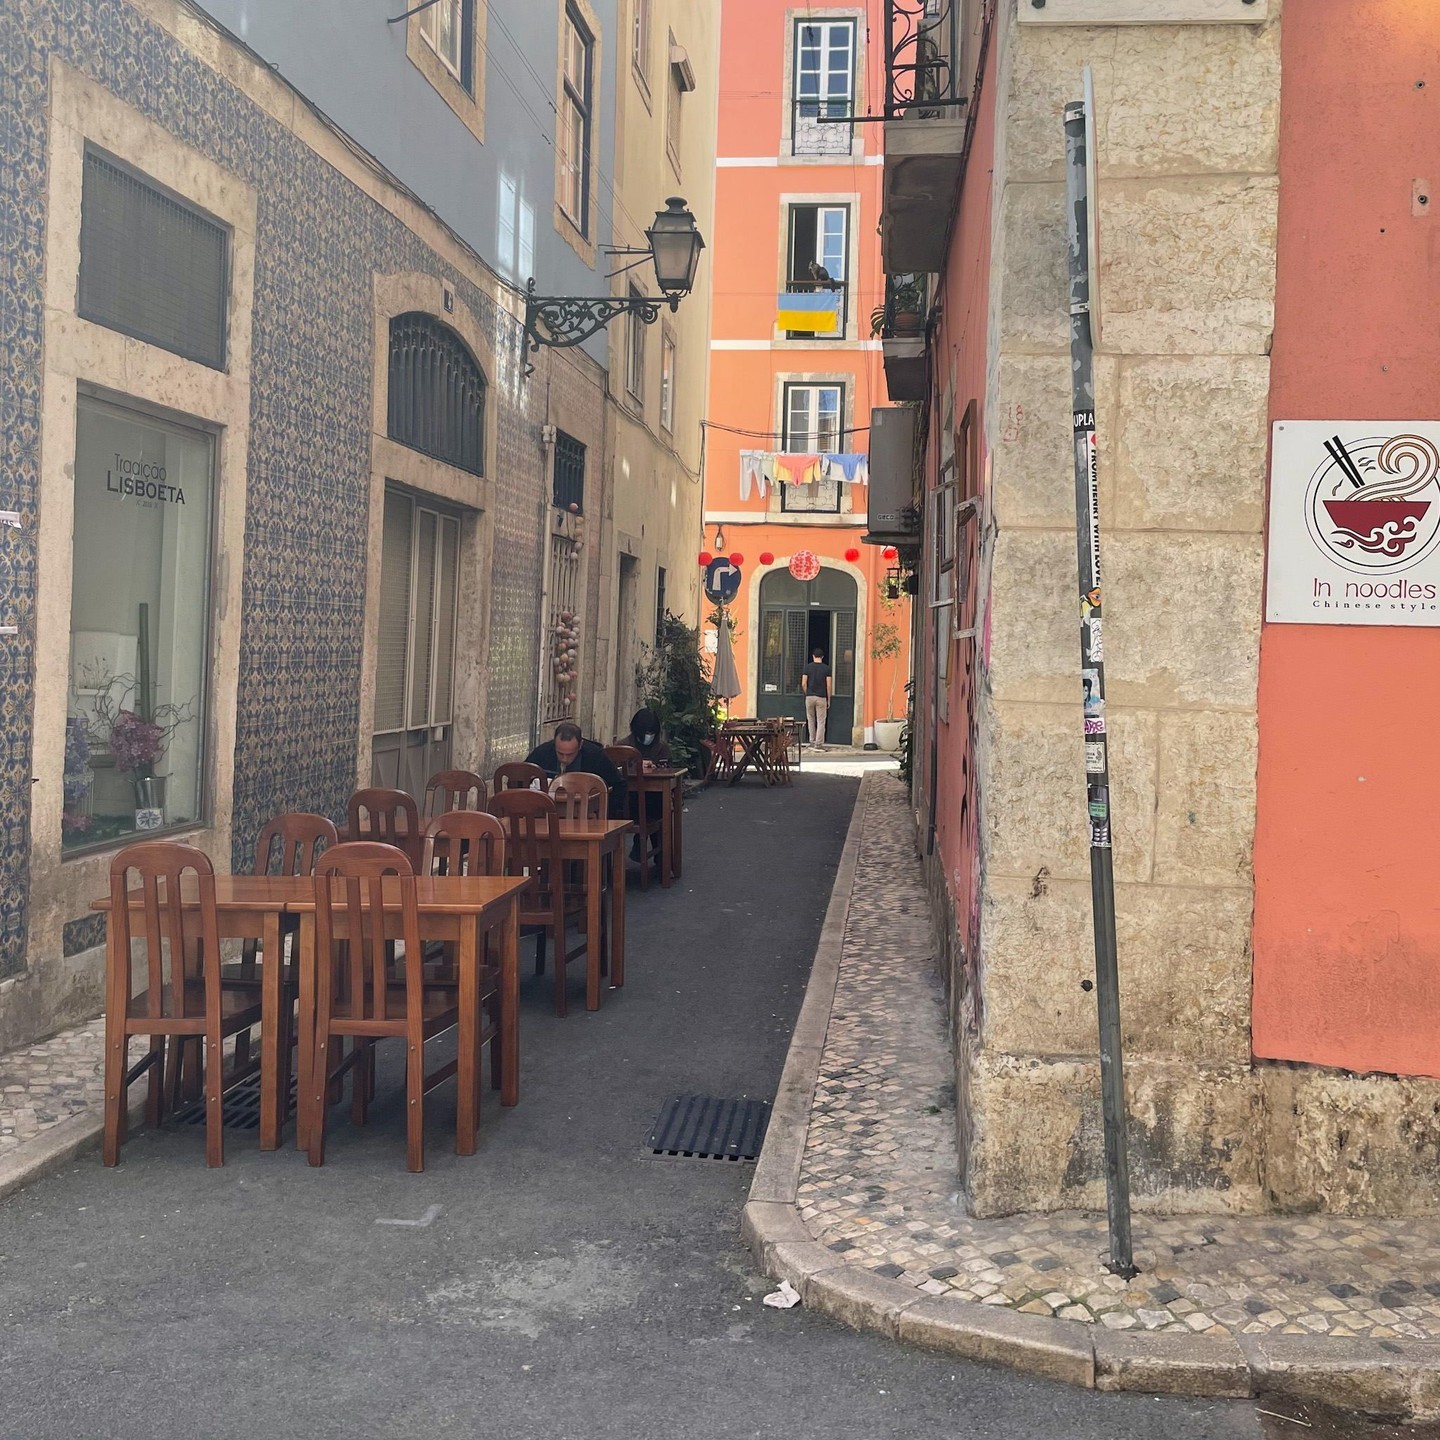 I love all of the outdoor dining. It seems like everywhere here has a few tables or chairs outside in the alley, in ways that aren't permitted in other countries. It makes the atmosphere wandering in the evenings just lovely. ?
?